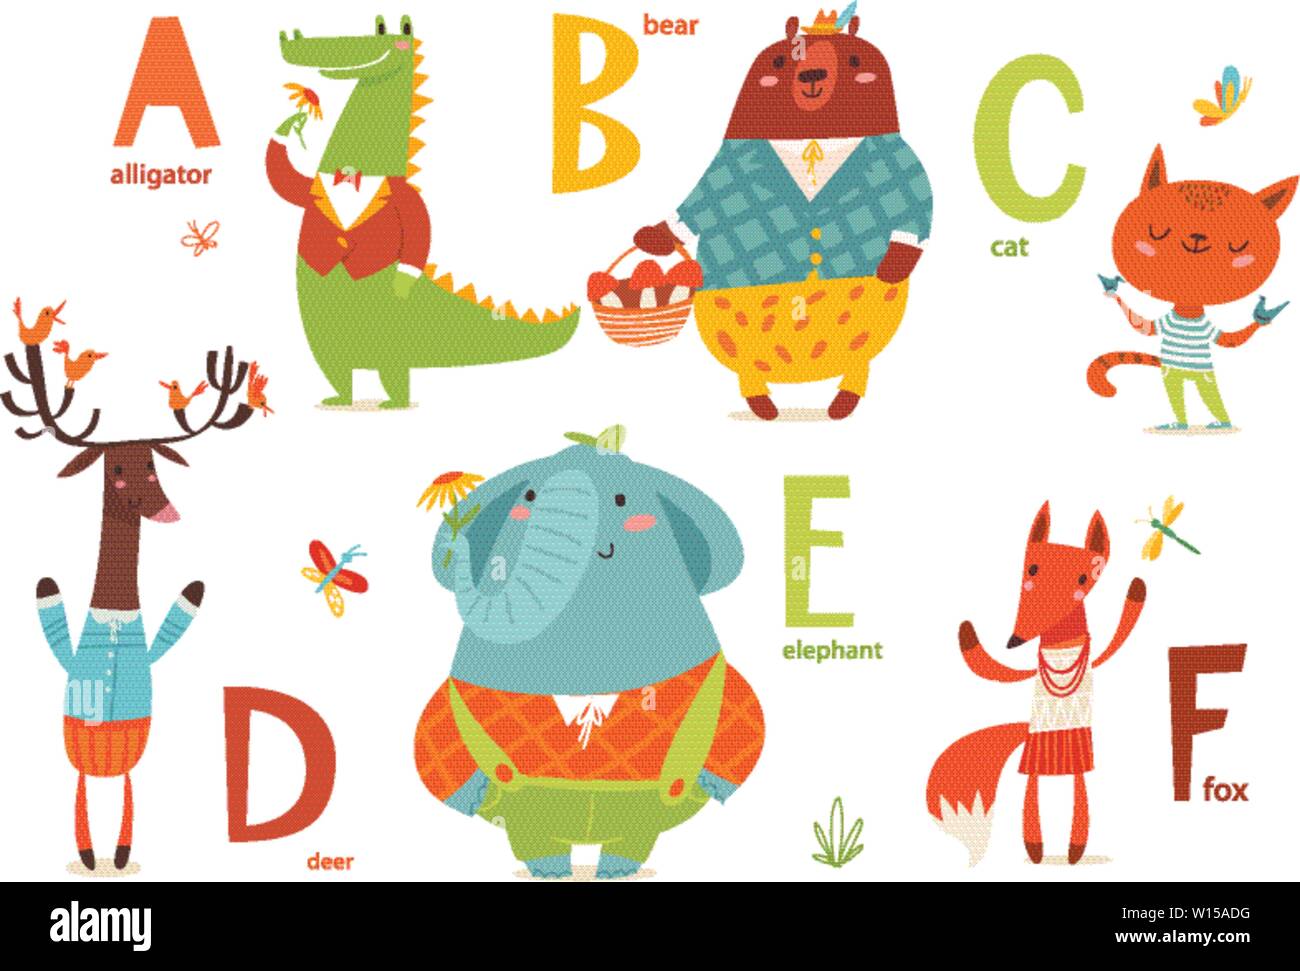 Part 1 of animals abc with cute cartoon animals and letters. Letters A-F. Stock Vector